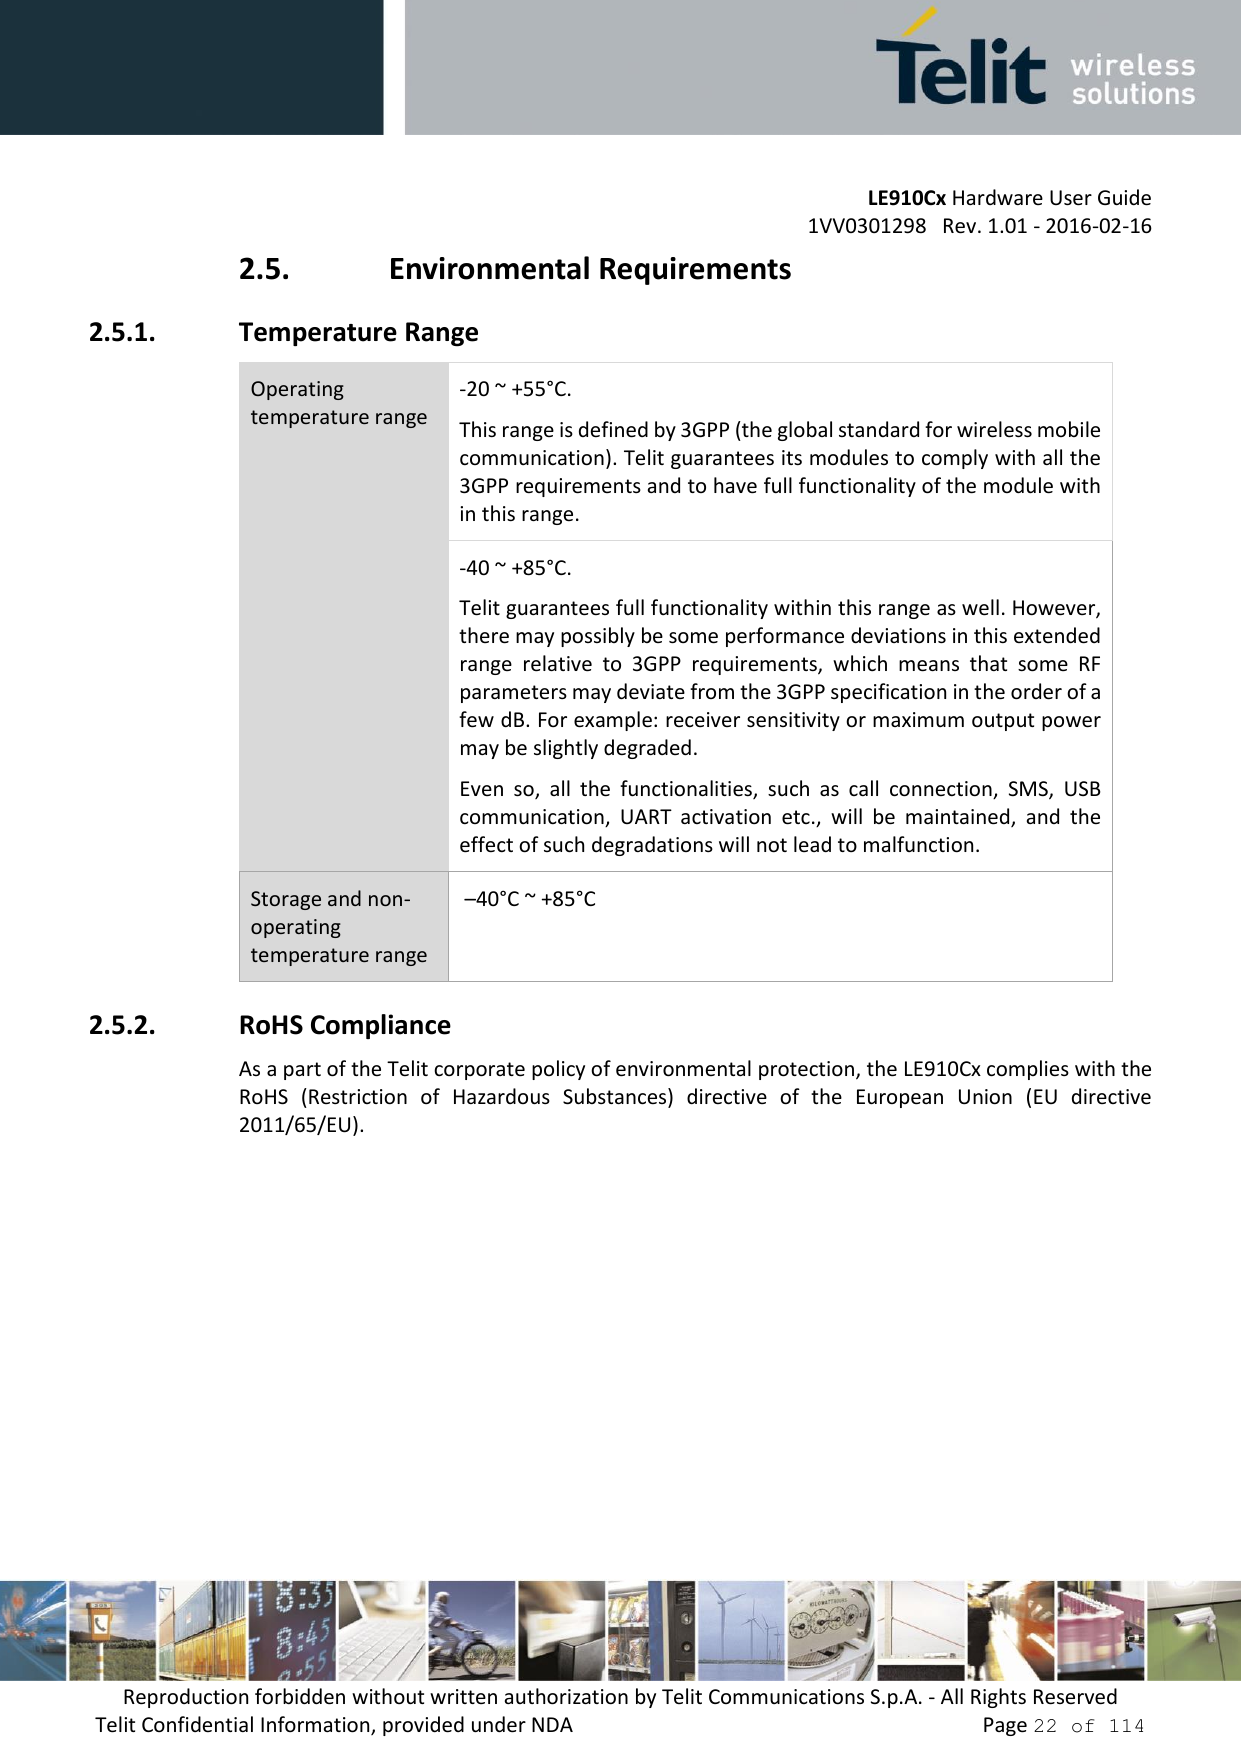         LE910Cx Hardware User Guide     1VV0301298   Rev. 1.01 - 2016-02-16 Reproduction forbidden without written authorization by Telit Communications S.p.A. - All Rights Reserved Telit Confidential Information, provided under NDA                 Page 22 of 114 2.5. Environmental Requirements 2.5.1. Temperature Range Operating temperature range -20 ~ +55°C.  This range is defined by 3GPP (the global standard for wireless mobile communication). Telit guarantees its modules to comply with all the 3GPP requirements and to have full functionality of the module with in this range. -40 ~ +85°C.  Telit guarantees full functionality within this range as well. However, there may possibly be some performance deviations in this extended range  relative  to  3GPP  requirements,  which  means  that  some  RF parameters may deviate from the 3GPP specification in the order of a few dB. For example: receiver sensitivity or maximum output power may be slightly degraded.  Even  so,  all  the  functionalities,  such  as  call  connection,  SMS,  USB communication,  UART  activation  etc.,  will  be  maintained,  and  the effect of such degradations will not lead to malfunction. Storage and non-operating temperature range  –40°C ~ +85°C 2.5.2. RoHS Compliance As a part of the Telit corporate policy of environmental protection, the LE910Cx complies with the RoHS  (Restriction  of  Hazardous  Substances)  directive  of  the  European  Union  (EU  directive 2011/65/EU).    